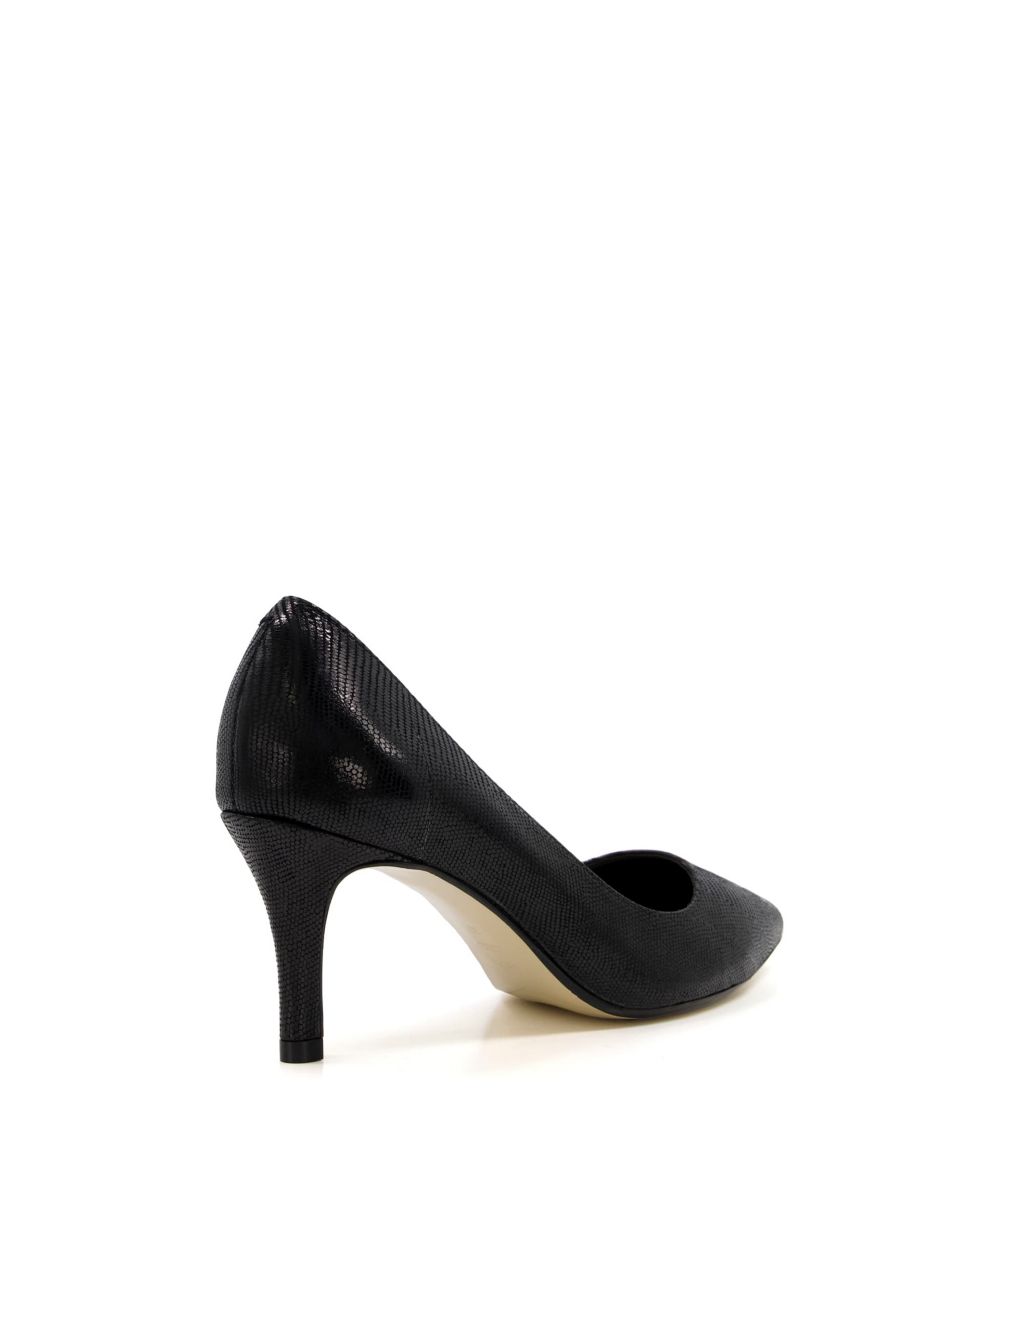 Andina Leather Stiletto Heel Court Shoes image 4